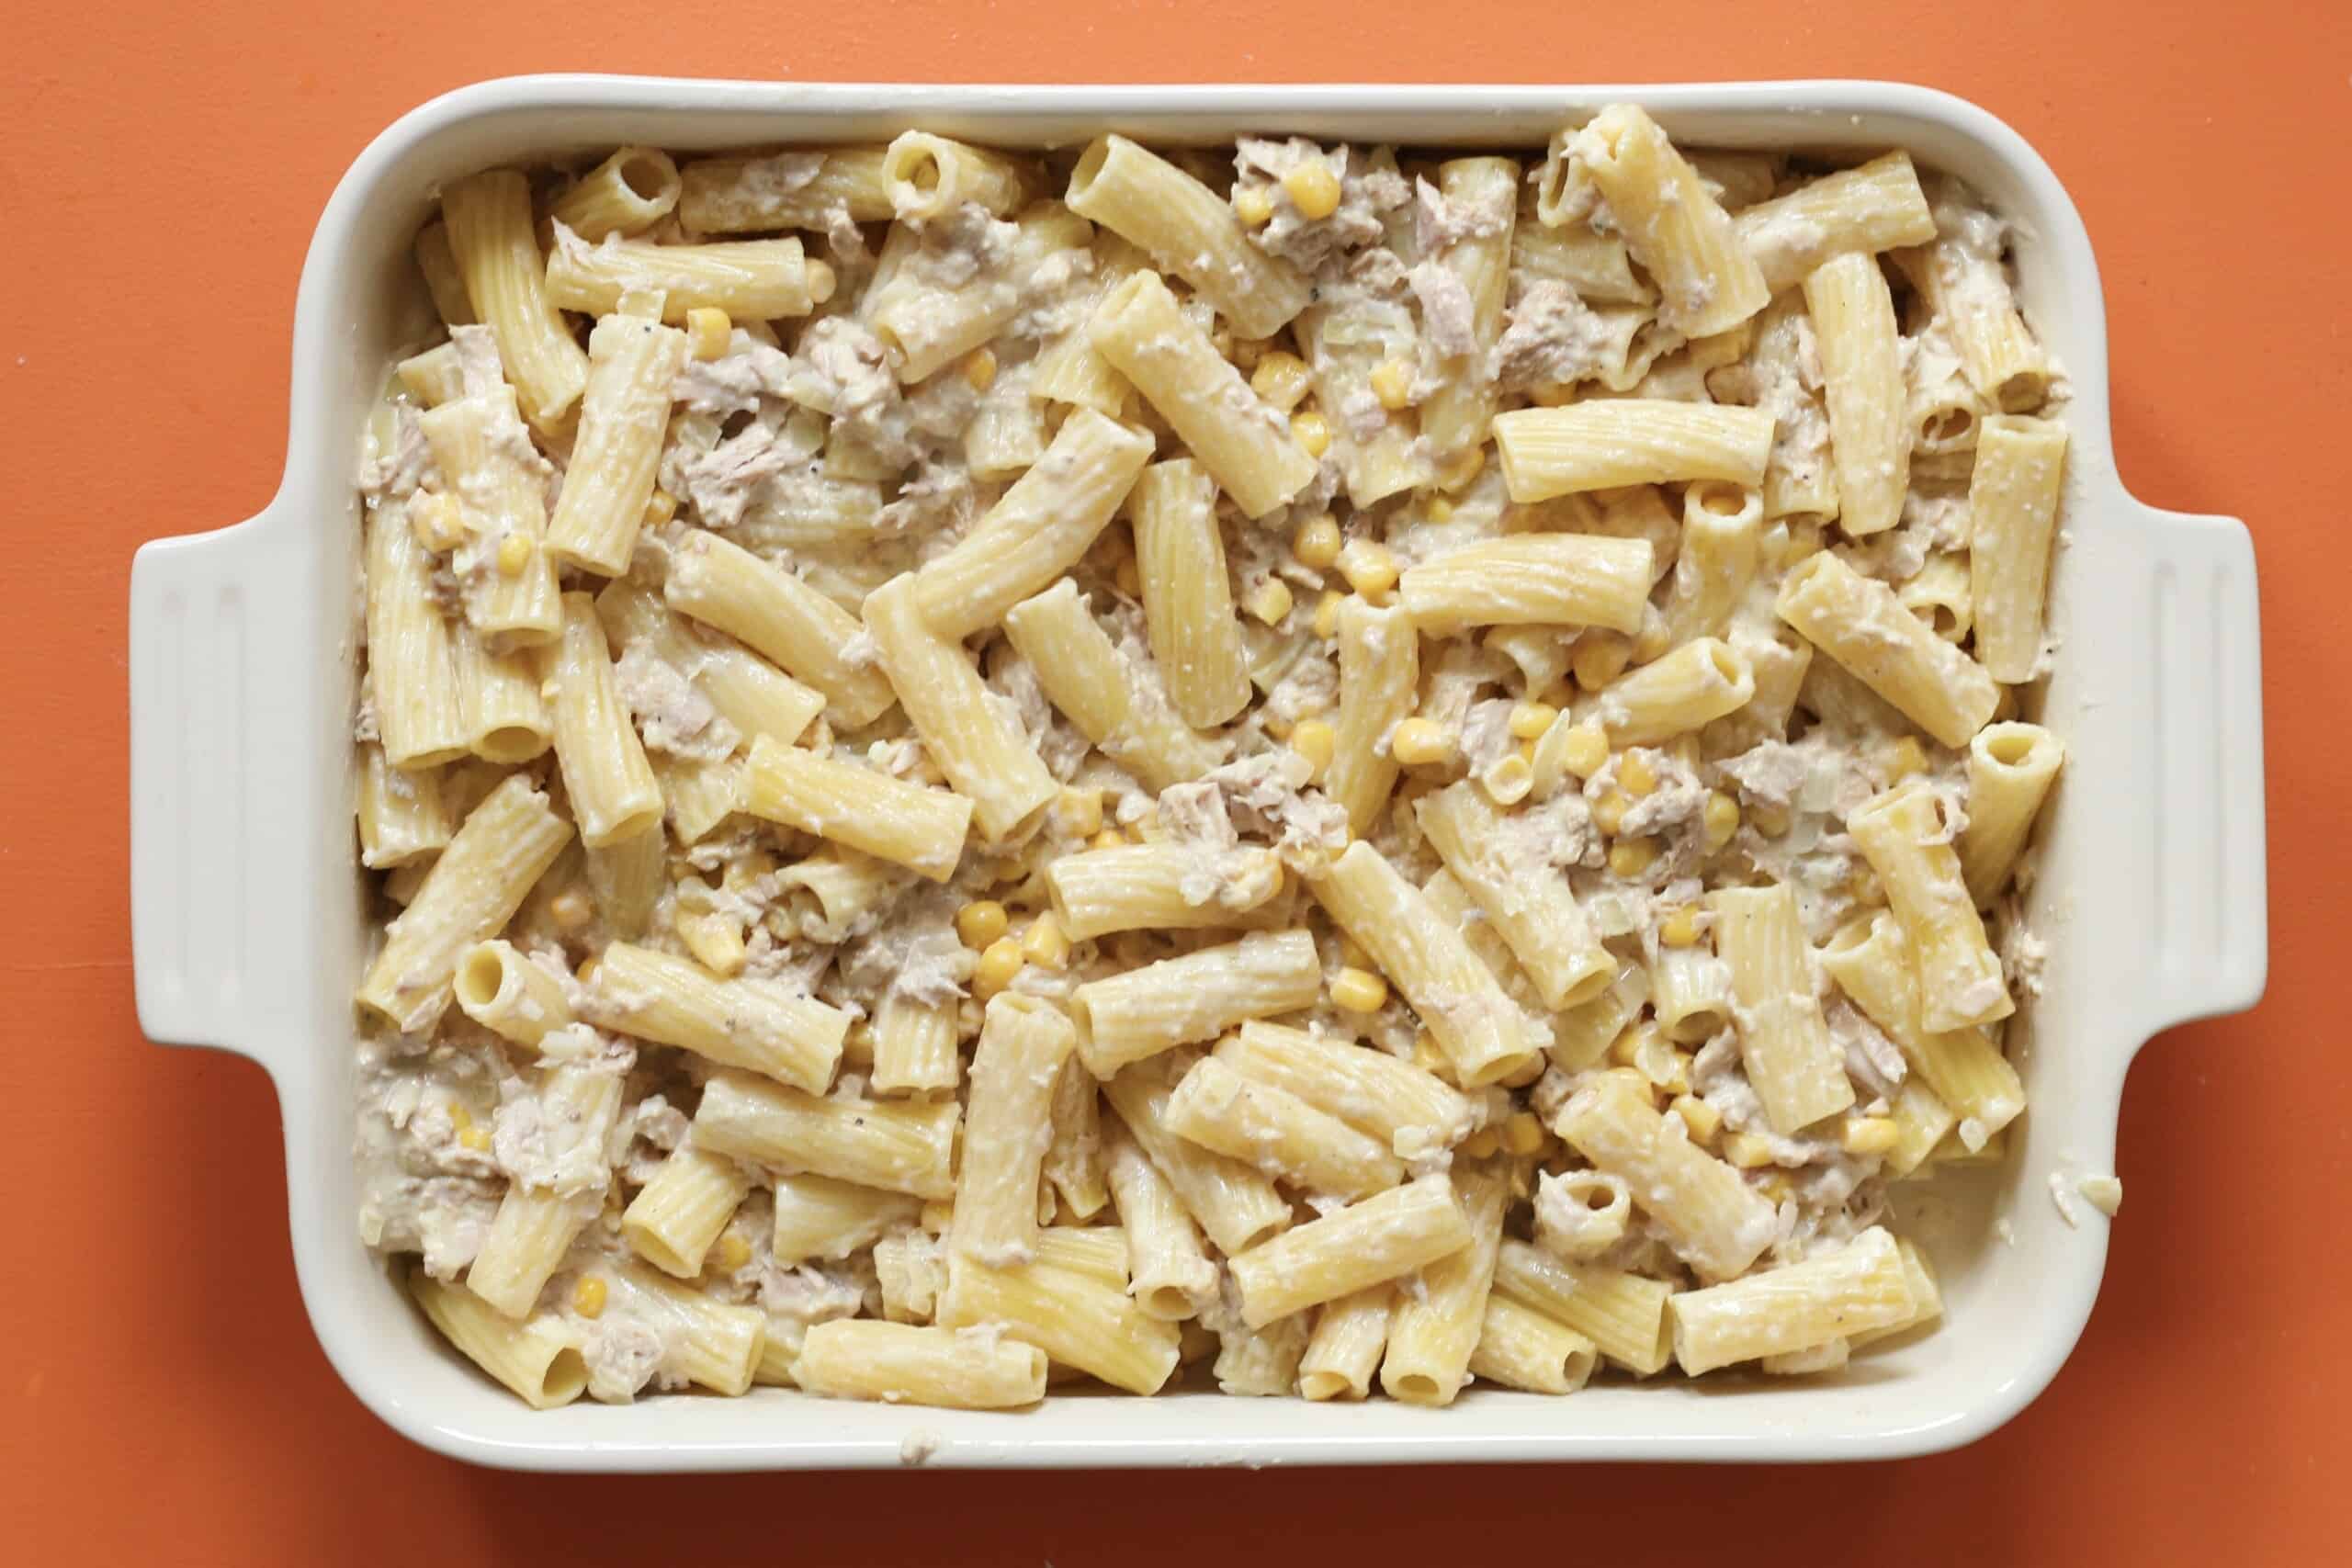 Rigatoni, sweetcorn and cheesy sauce mixed together in a white rectangular baking dish on a stove on an orange background.